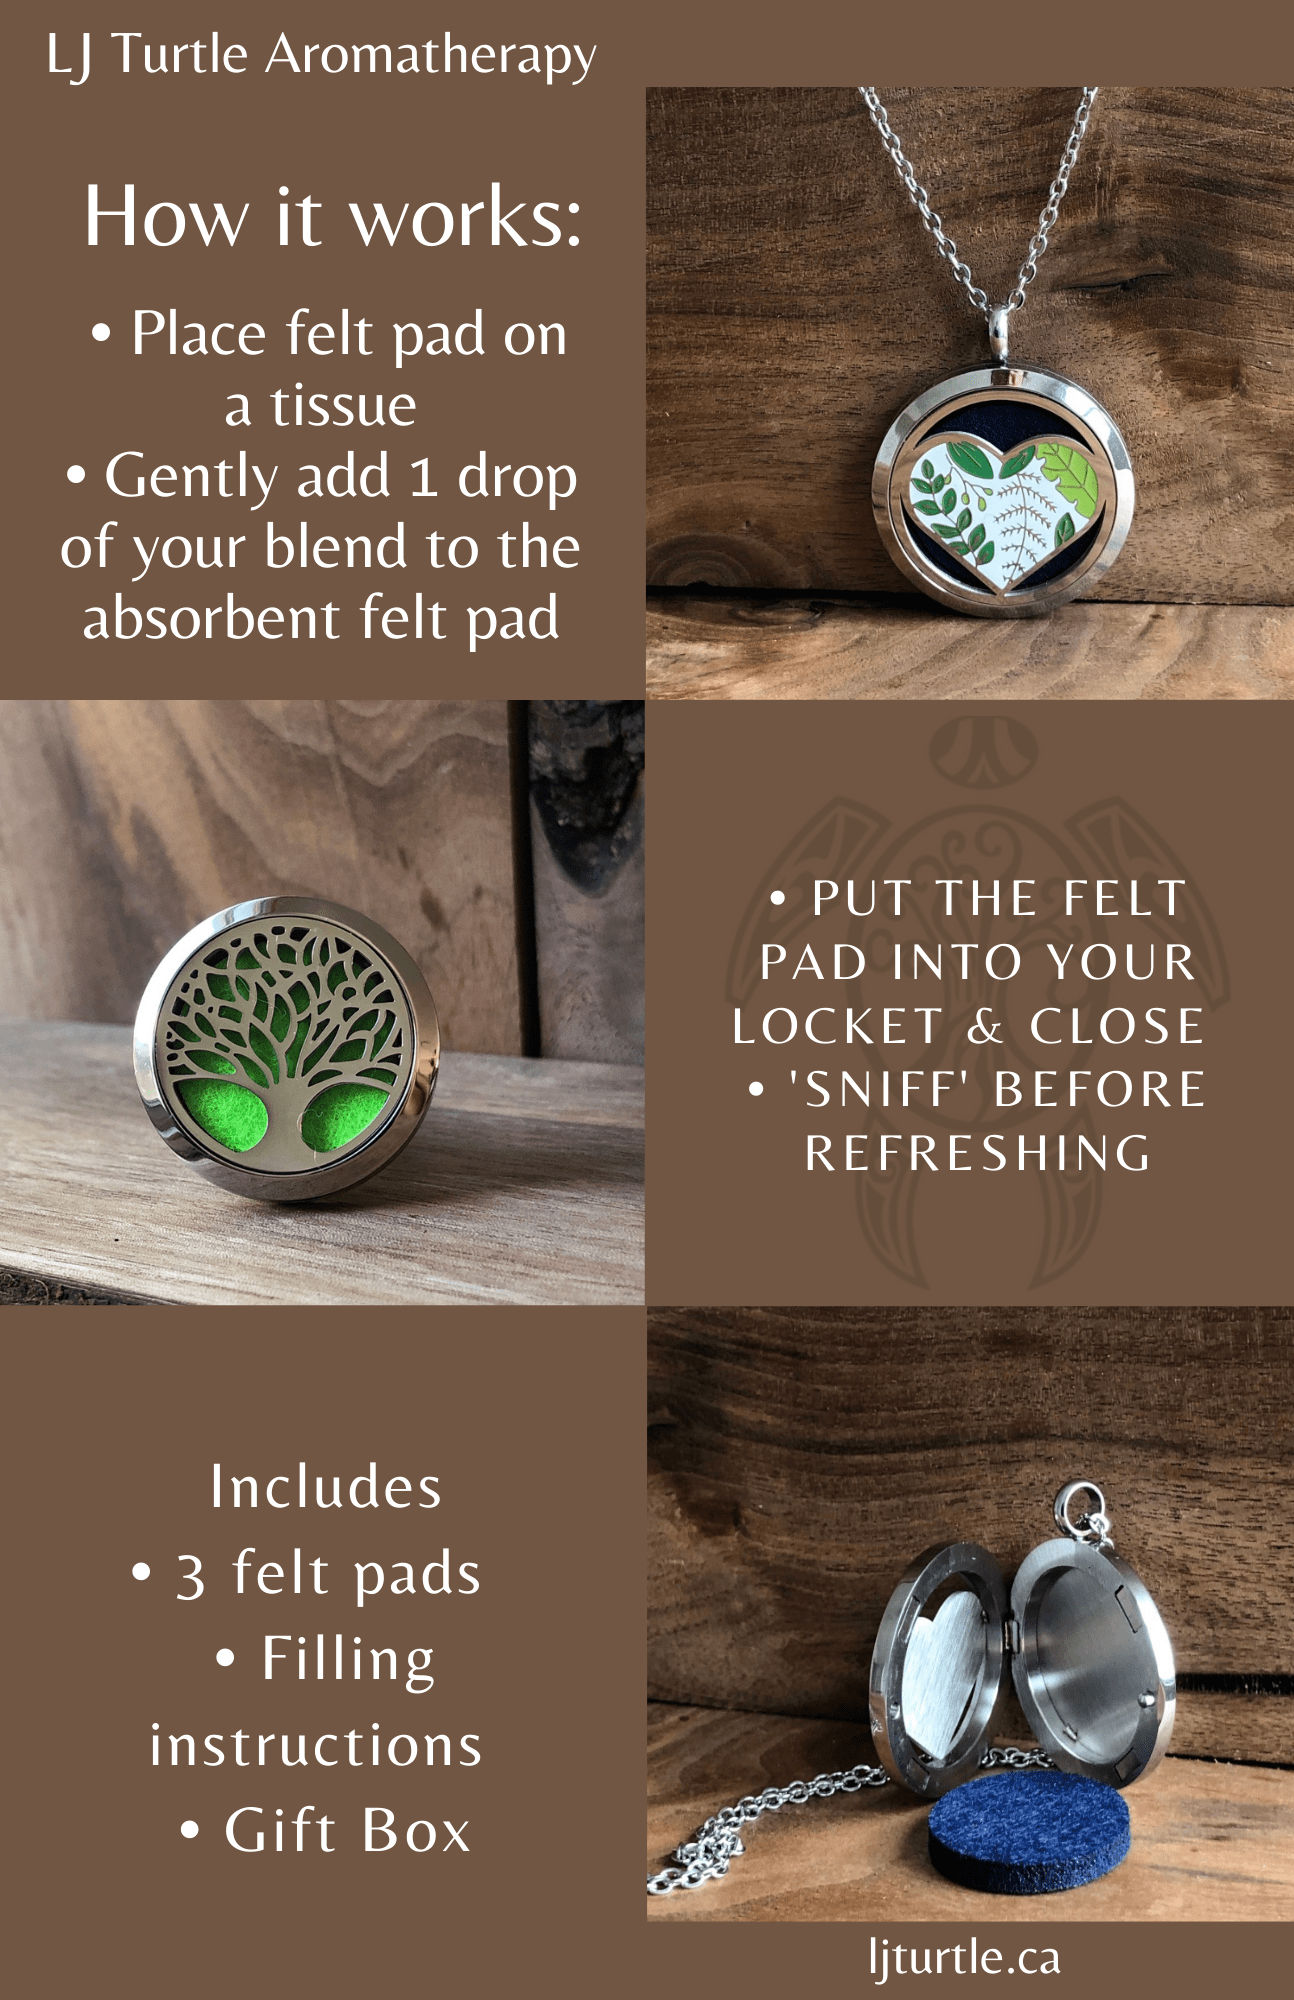 LJ Turtle Aromatherapy & Accessories Terrier | Stainless Steel Aromatherapy Diffuser Pendant